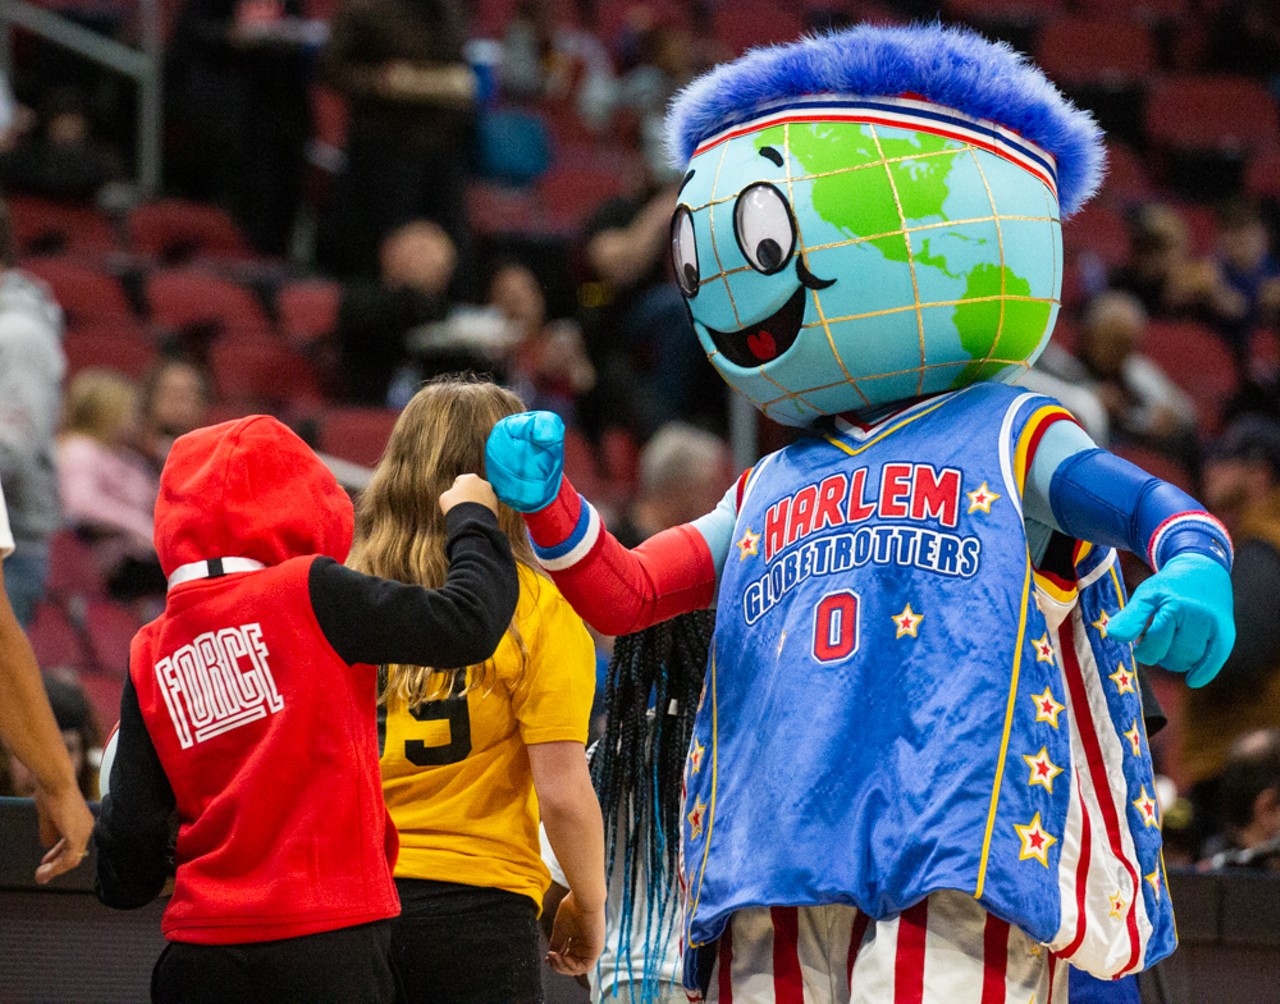 PHOTOS: All The Shots And Stunts We Saw At The Harlem Globetrotters Game